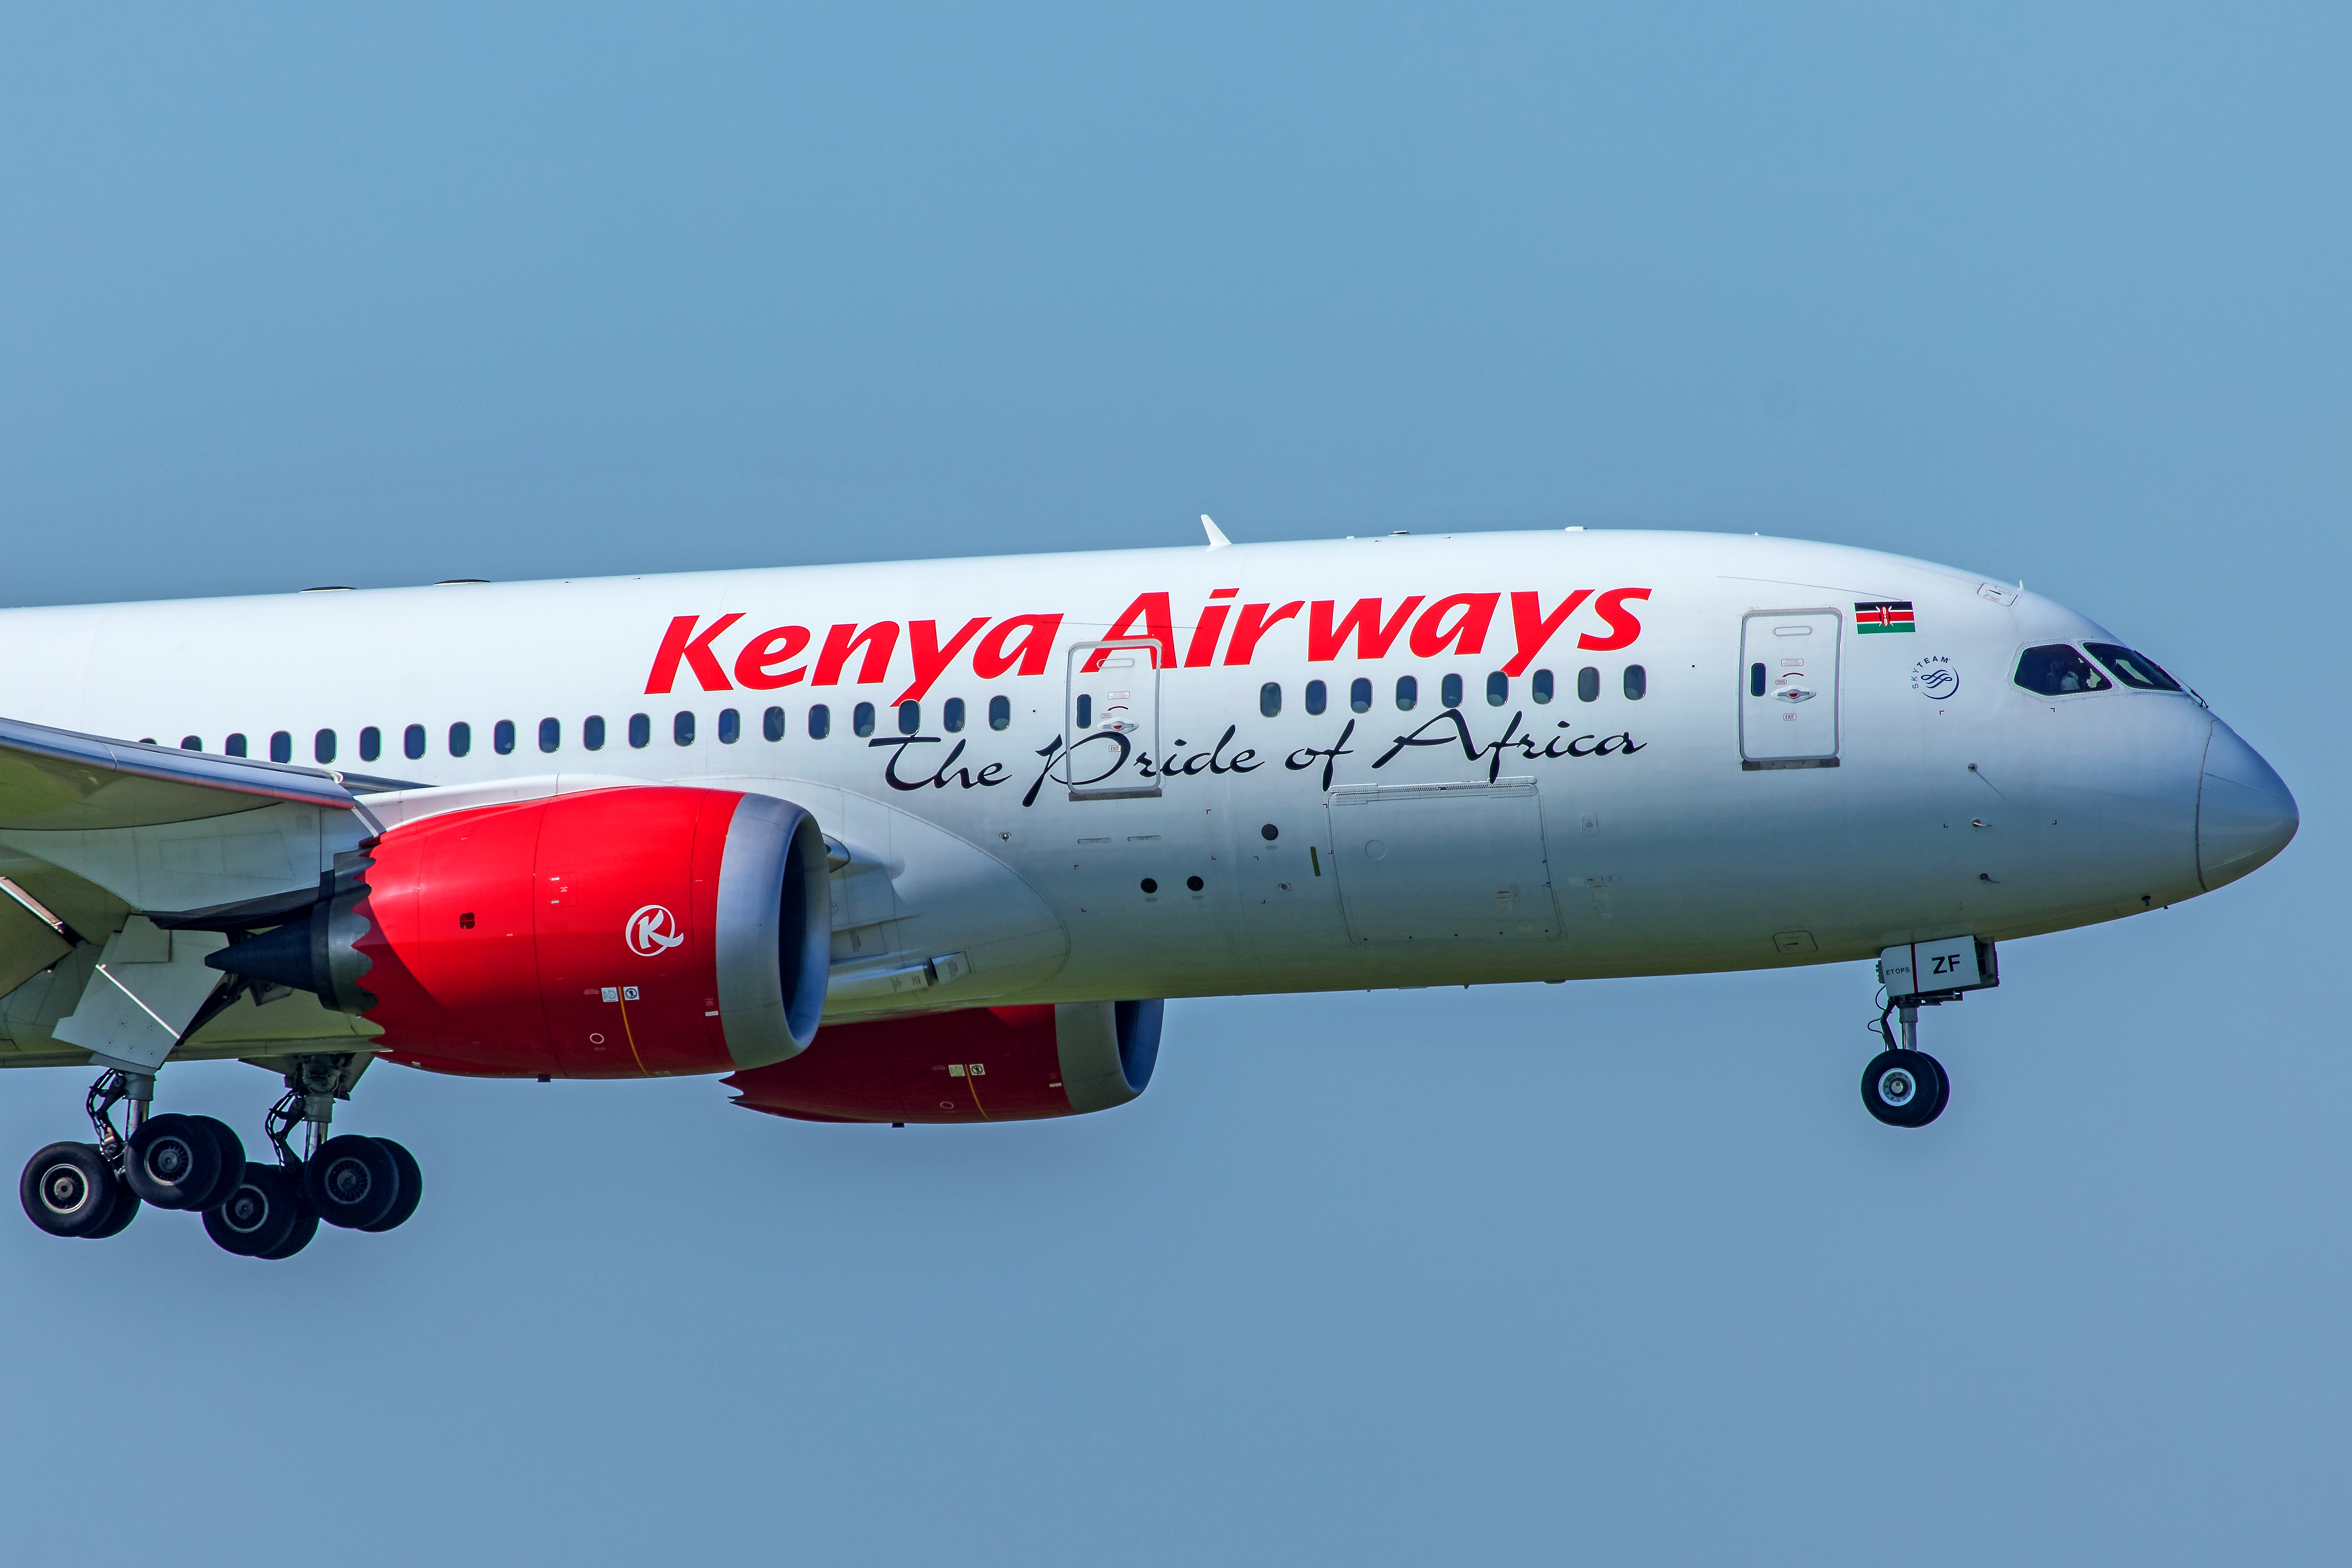 Kenya Airways Outlines its Innovative Strategy, Commits to Fight Against Wildlife Trafficking